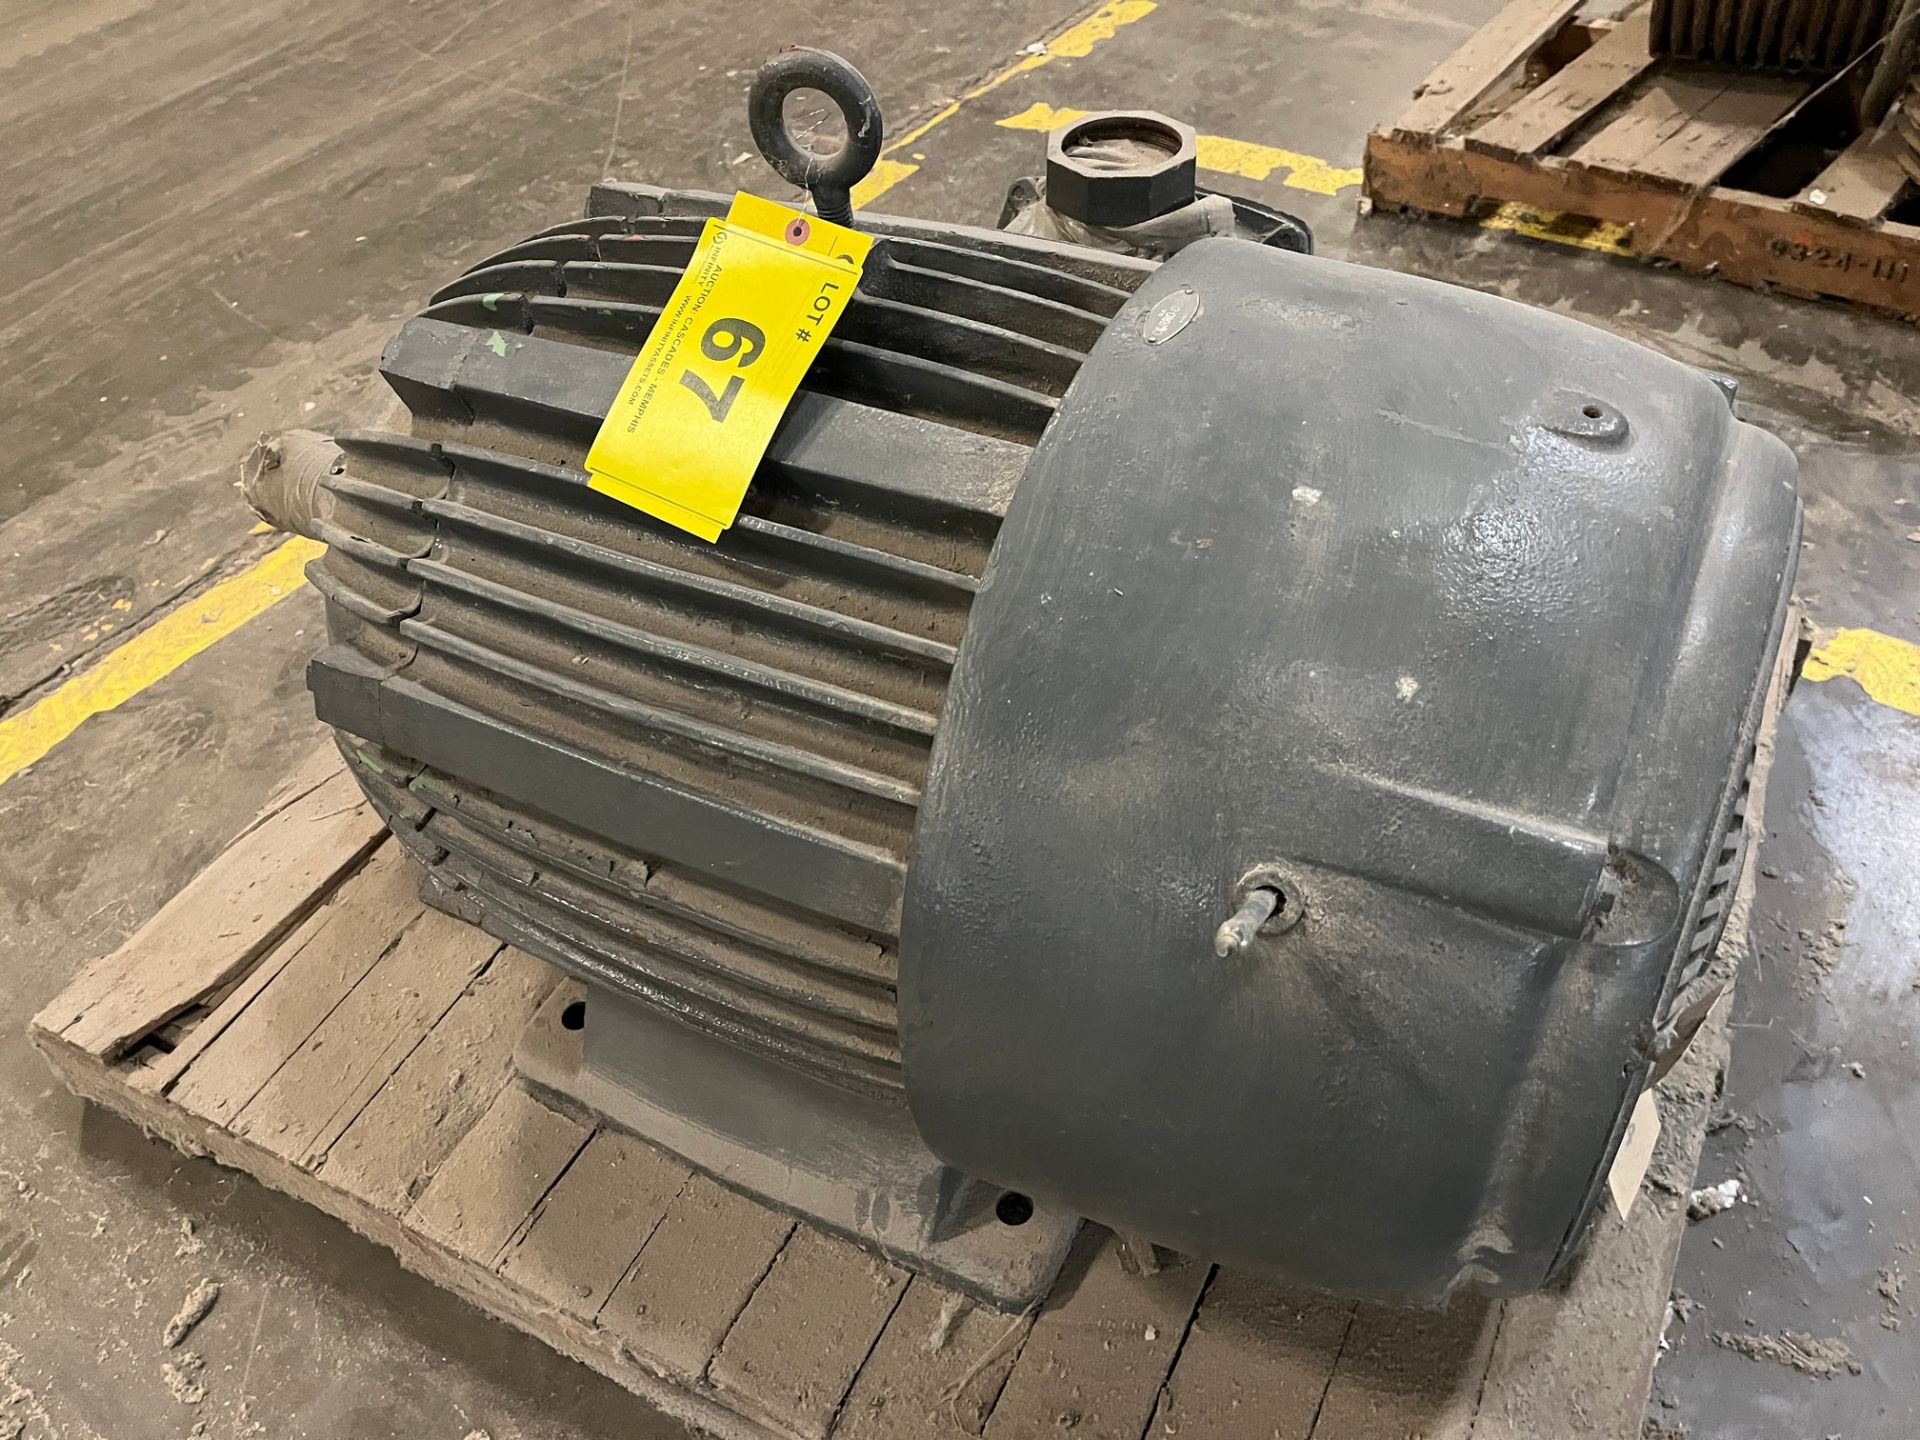 US ELECTRICAL MOTORS 125HP MOTOR, 3,555 RPM, 460V, 444T FRAME (PAPER MACHINE BUILDING WAREHOUSE, ROW